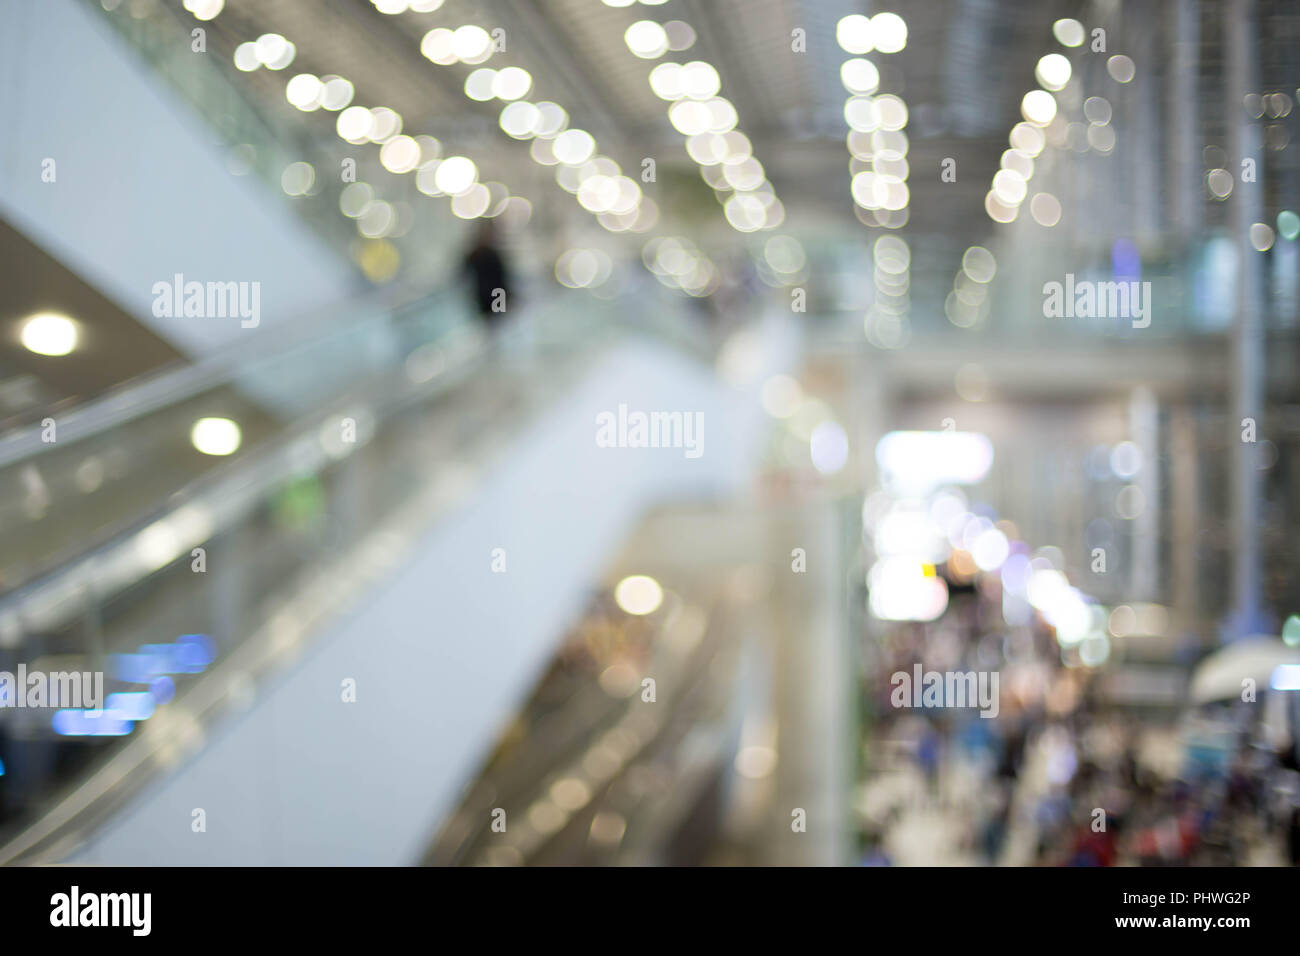 Cocept people on escalator at the airport in blured background Stock Photo